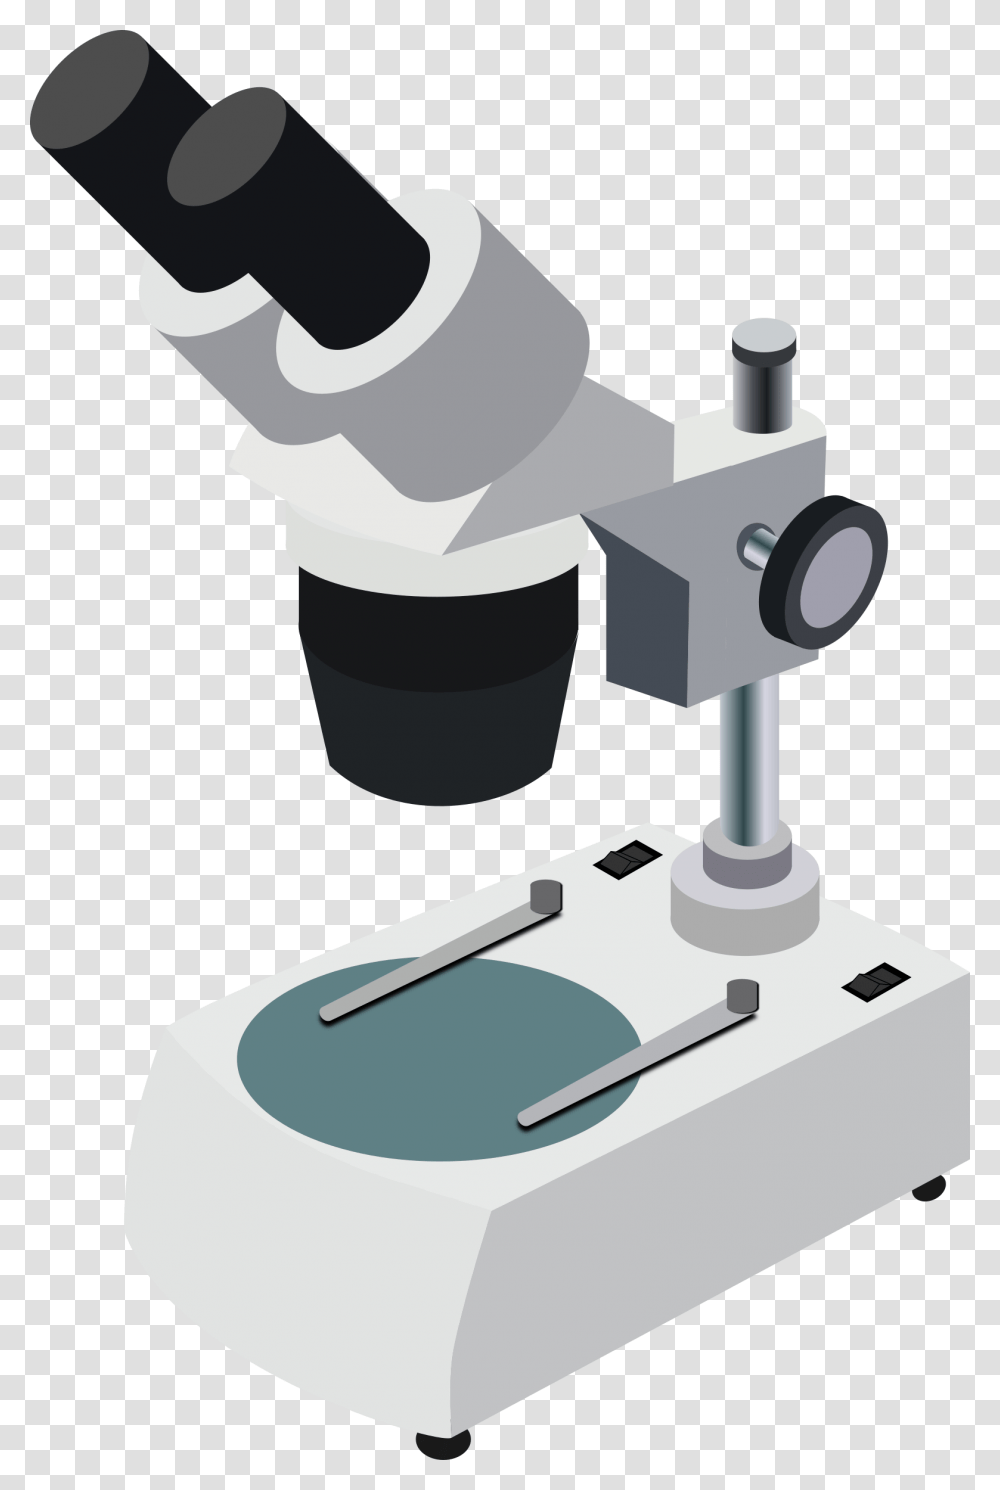 Microscope Svg Clip Arts Microscope Clipart, Sink Faucet, Tabletop, Furniture Transparent Png